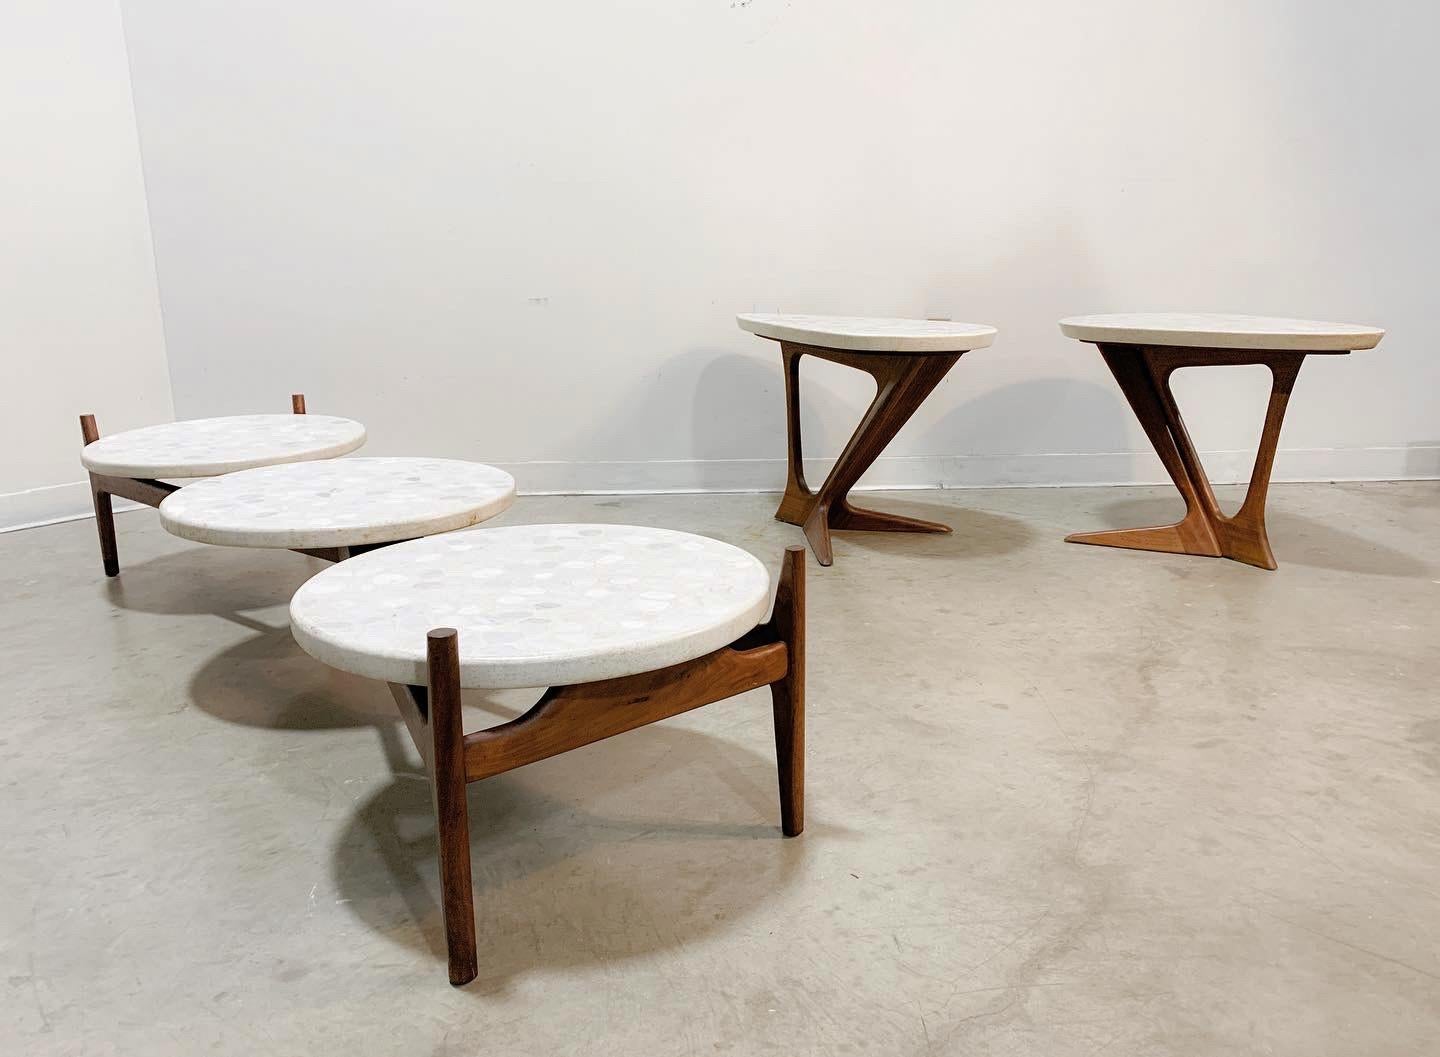 Stunning coffee and side table set with sculpted walnut bases and beautiful terrazzo tops attributed to Harvey Probber.

This set is in very good condition. The walnut frames are solid, expertly crafted and have a wonderful rich wood grain. The